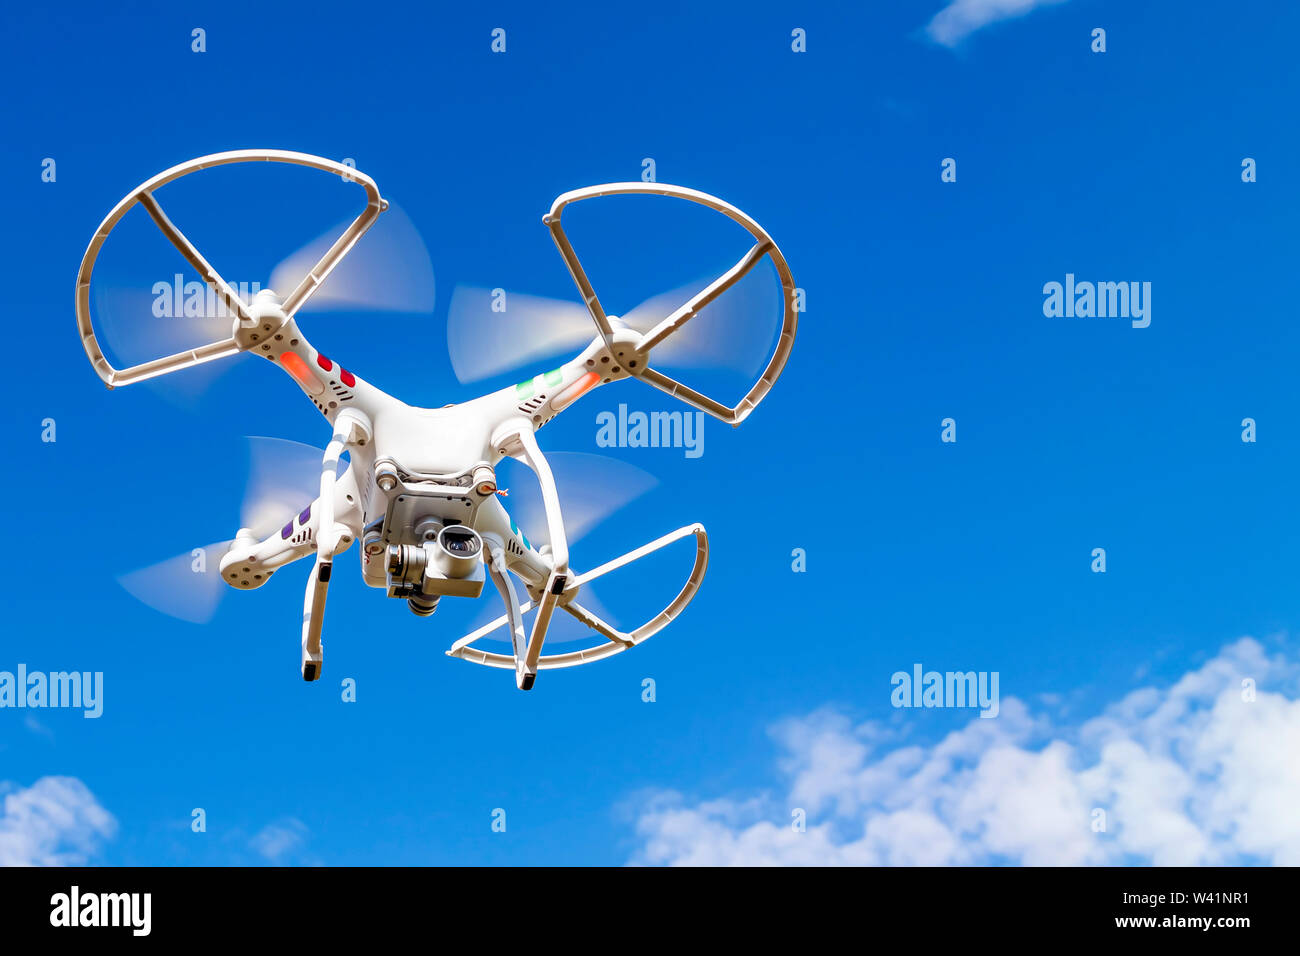 Kaluga, Russia 06/02/2019 Quadrocopter with a camera in flight against a blue sky. Stock Photo